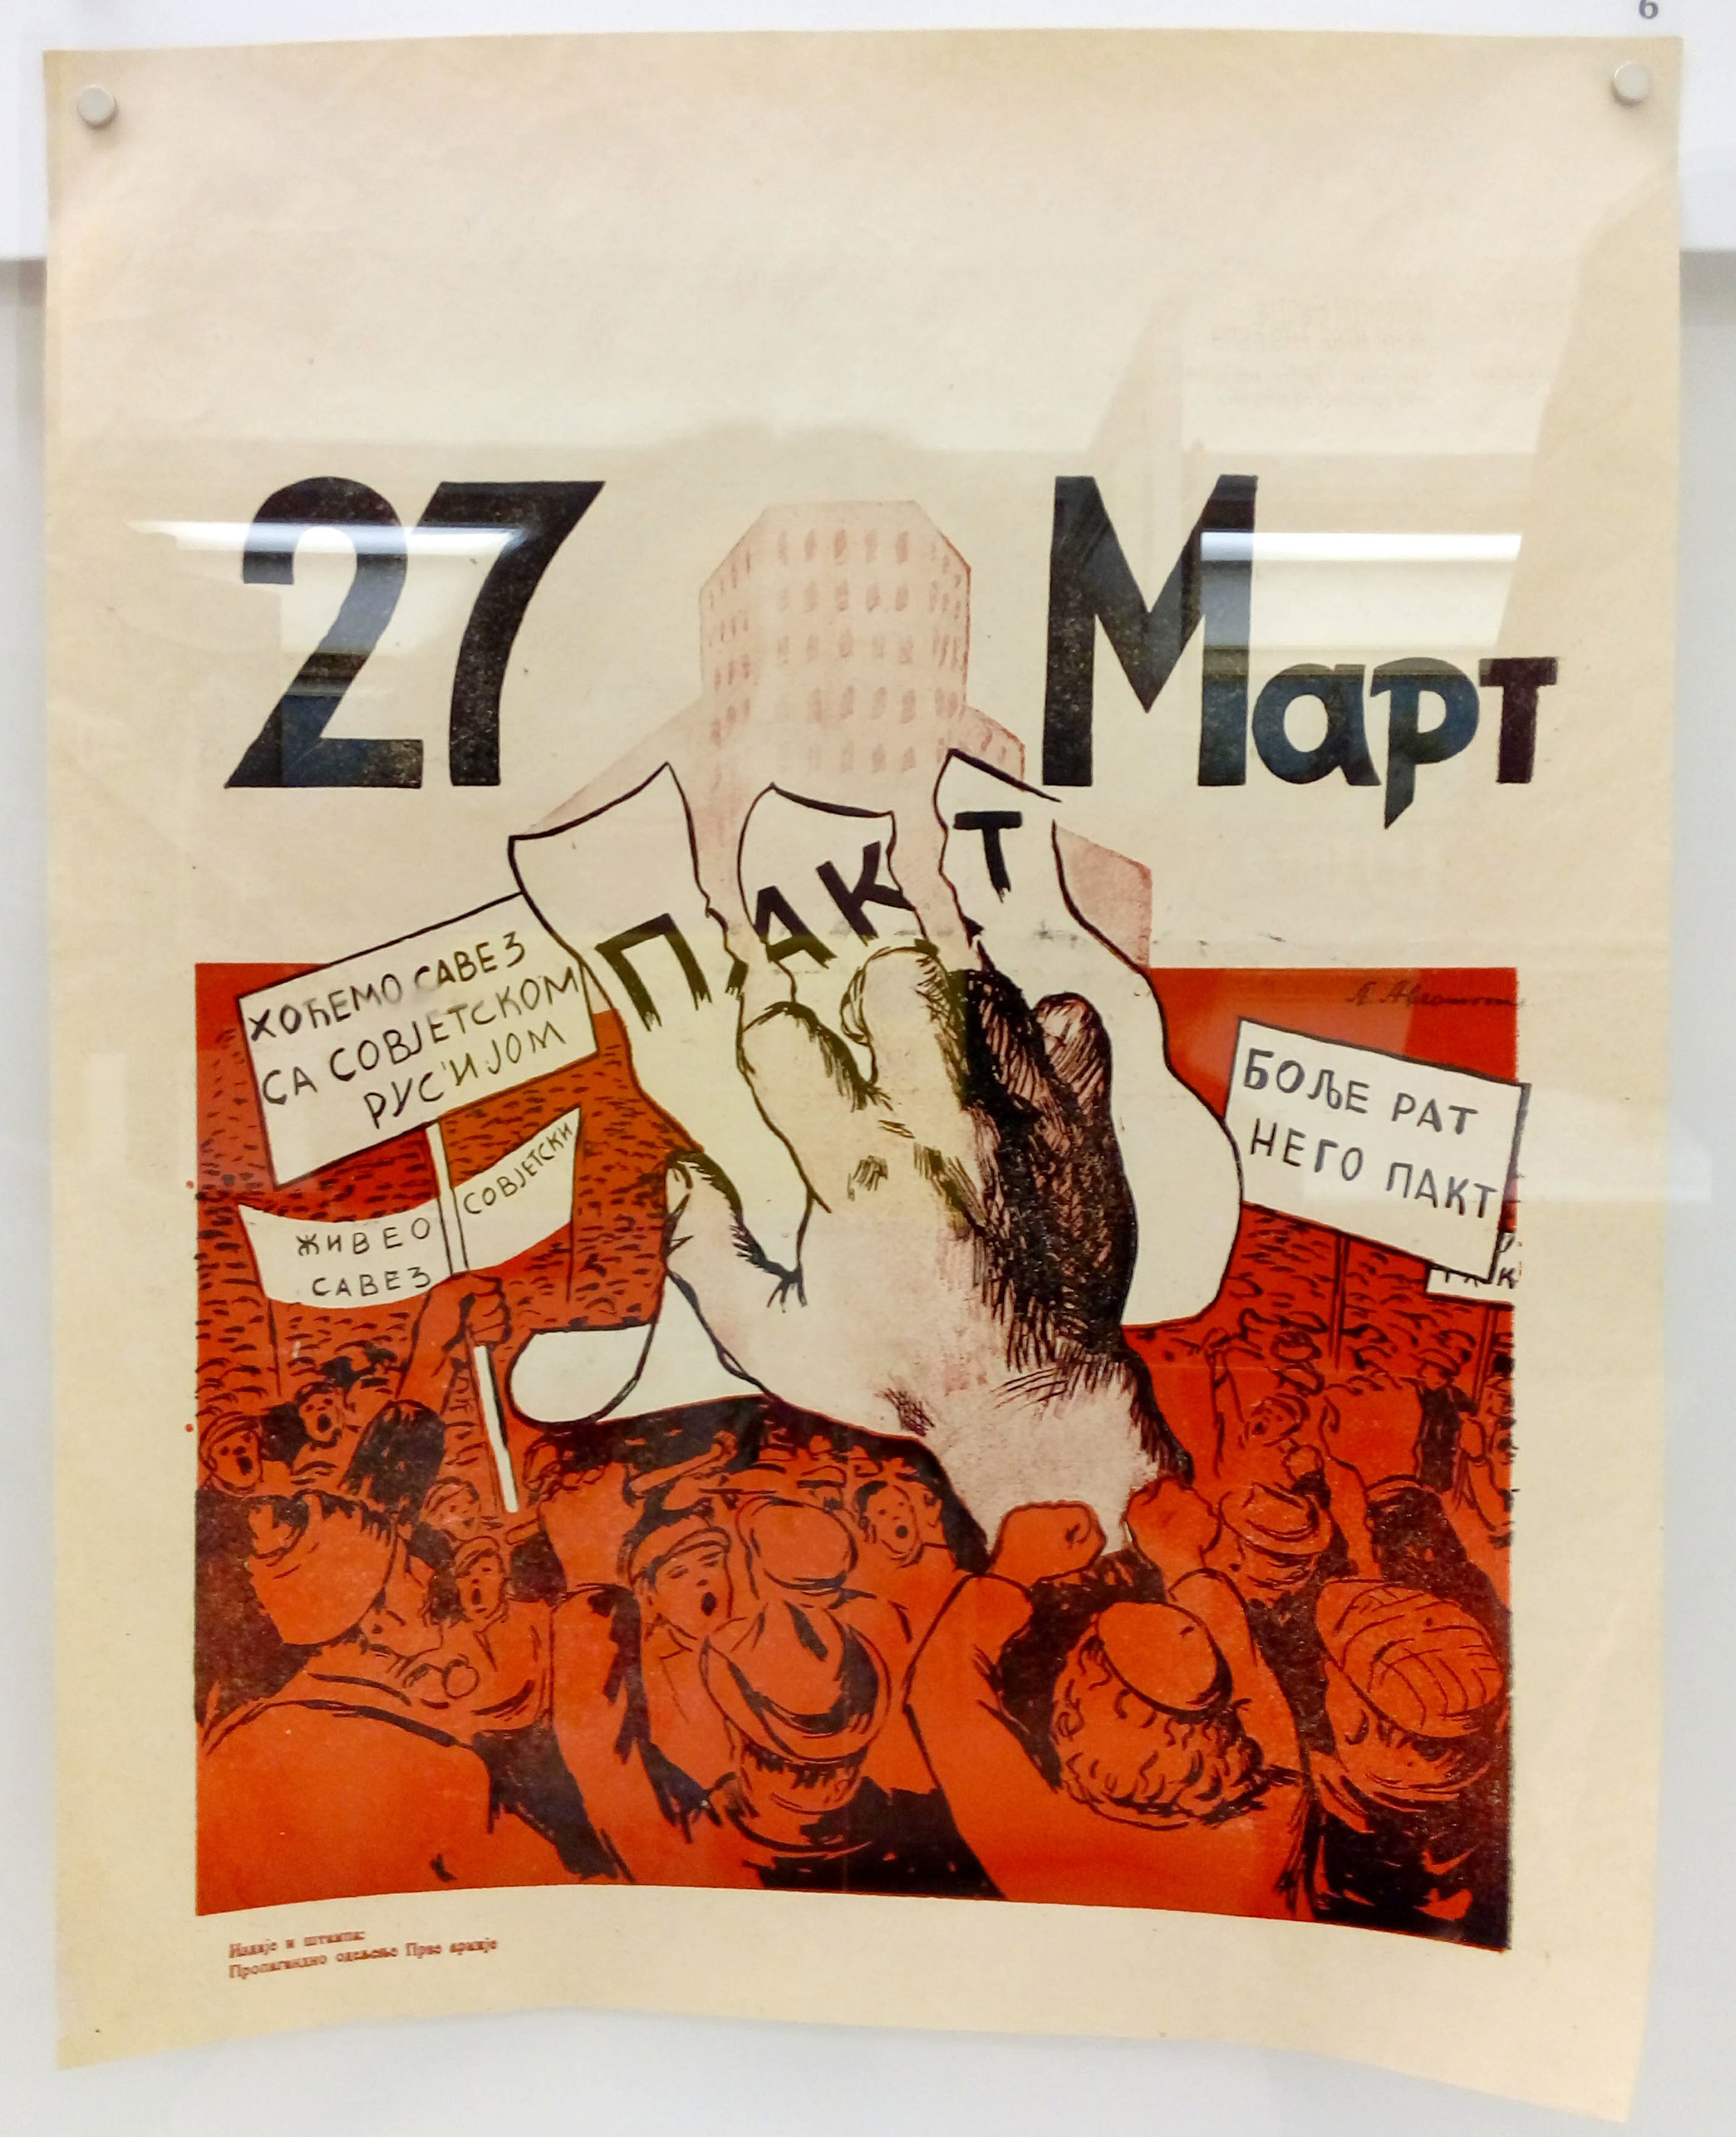 27 March poster.jpg